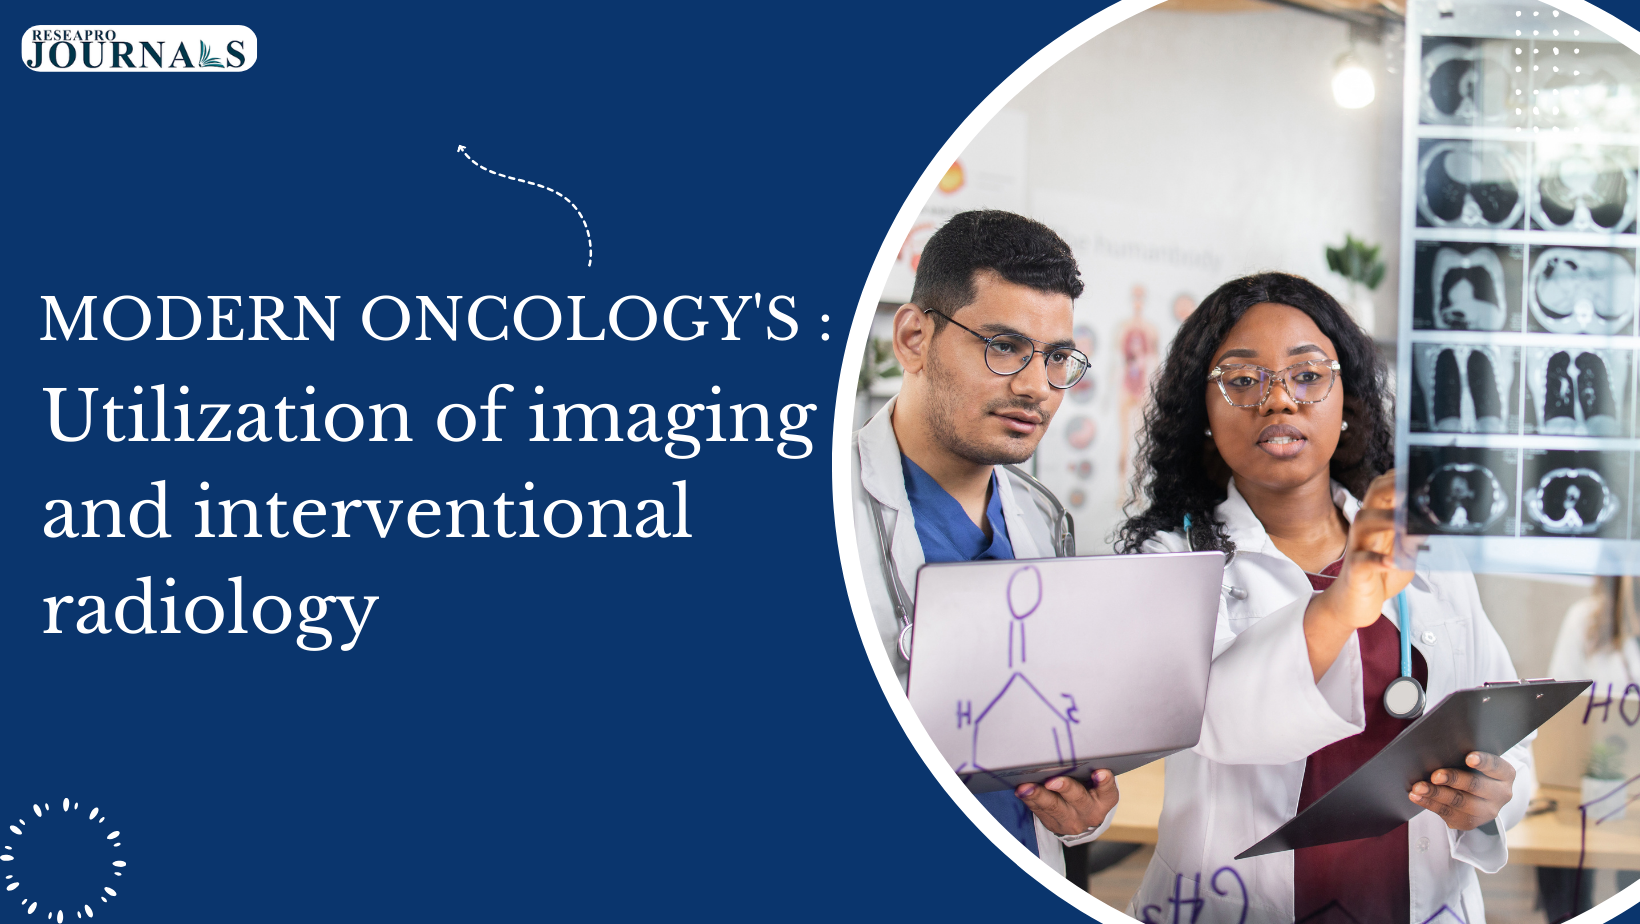 MODERN ONCOLOGY’S: Utilization of imaging and interventional radiology